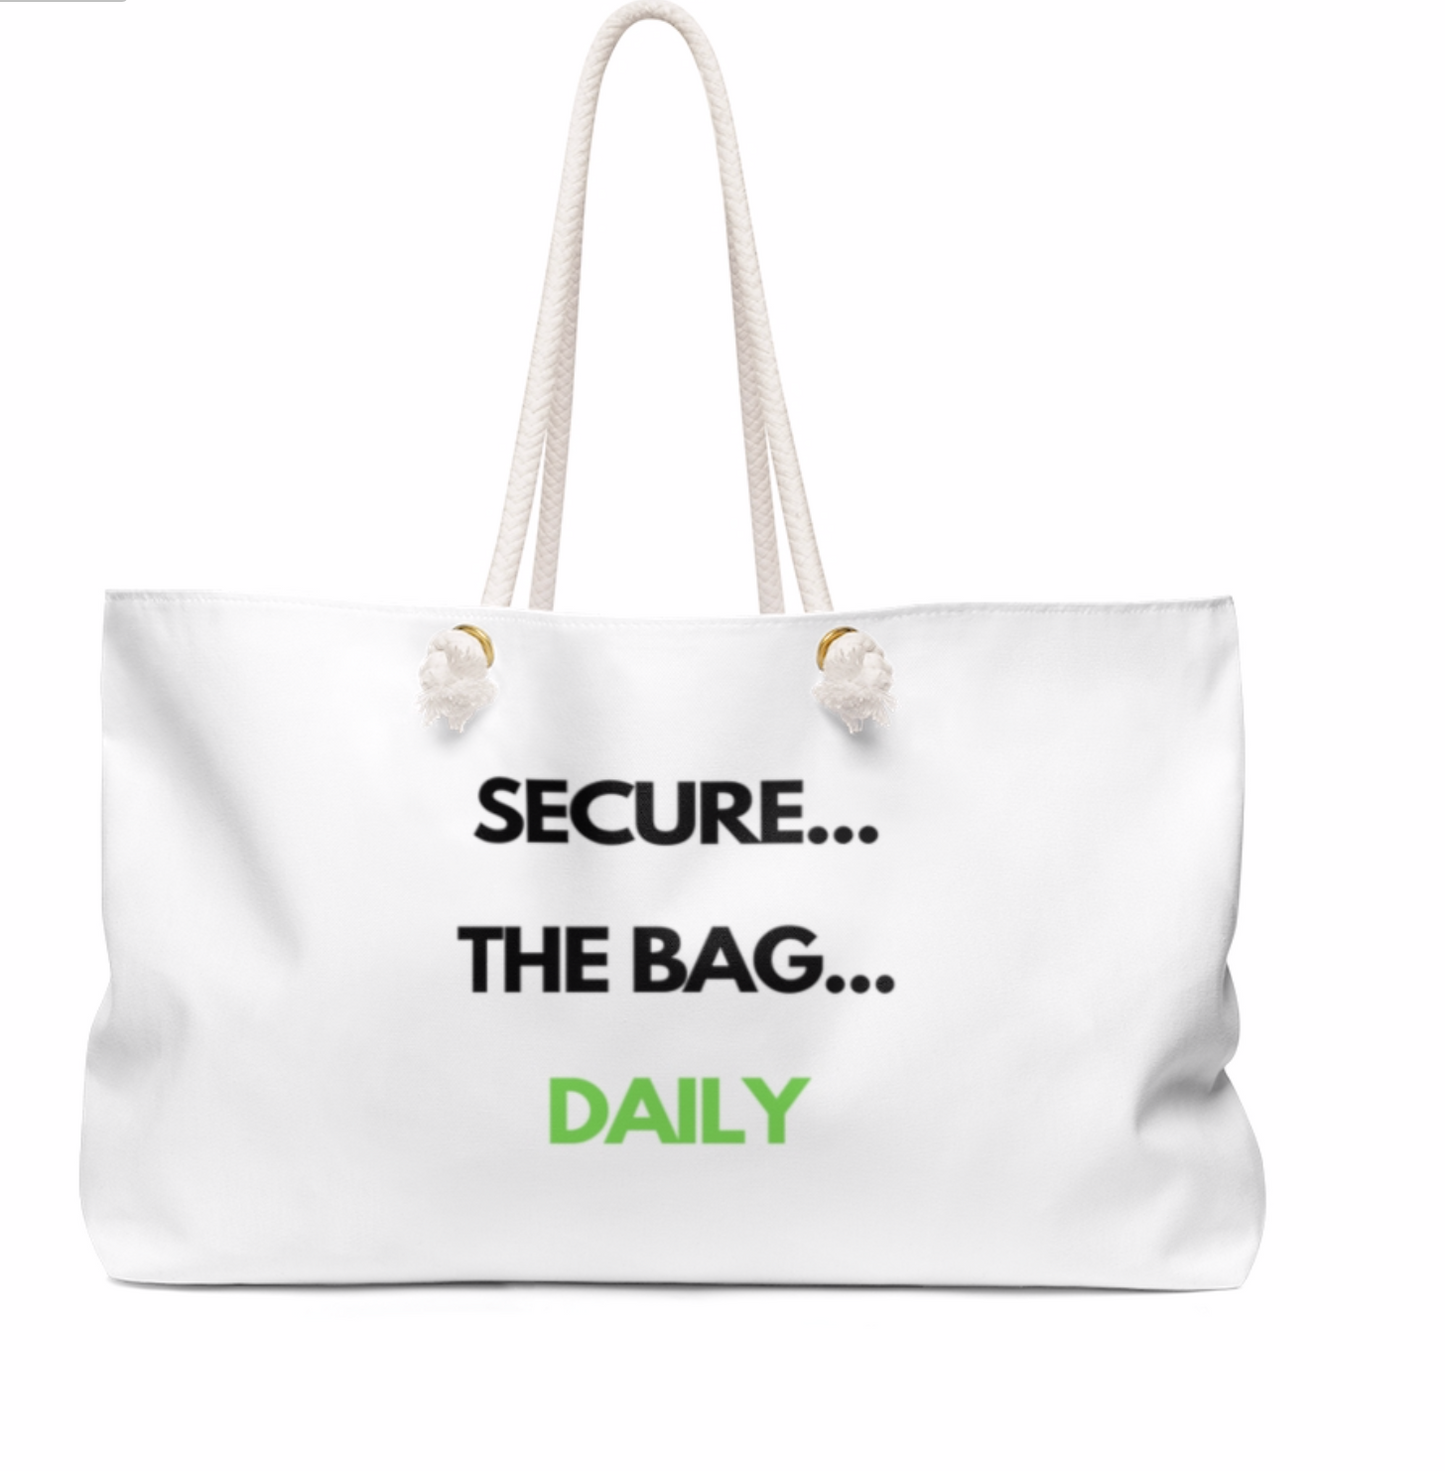 Every Day is Payday Weekender Bag